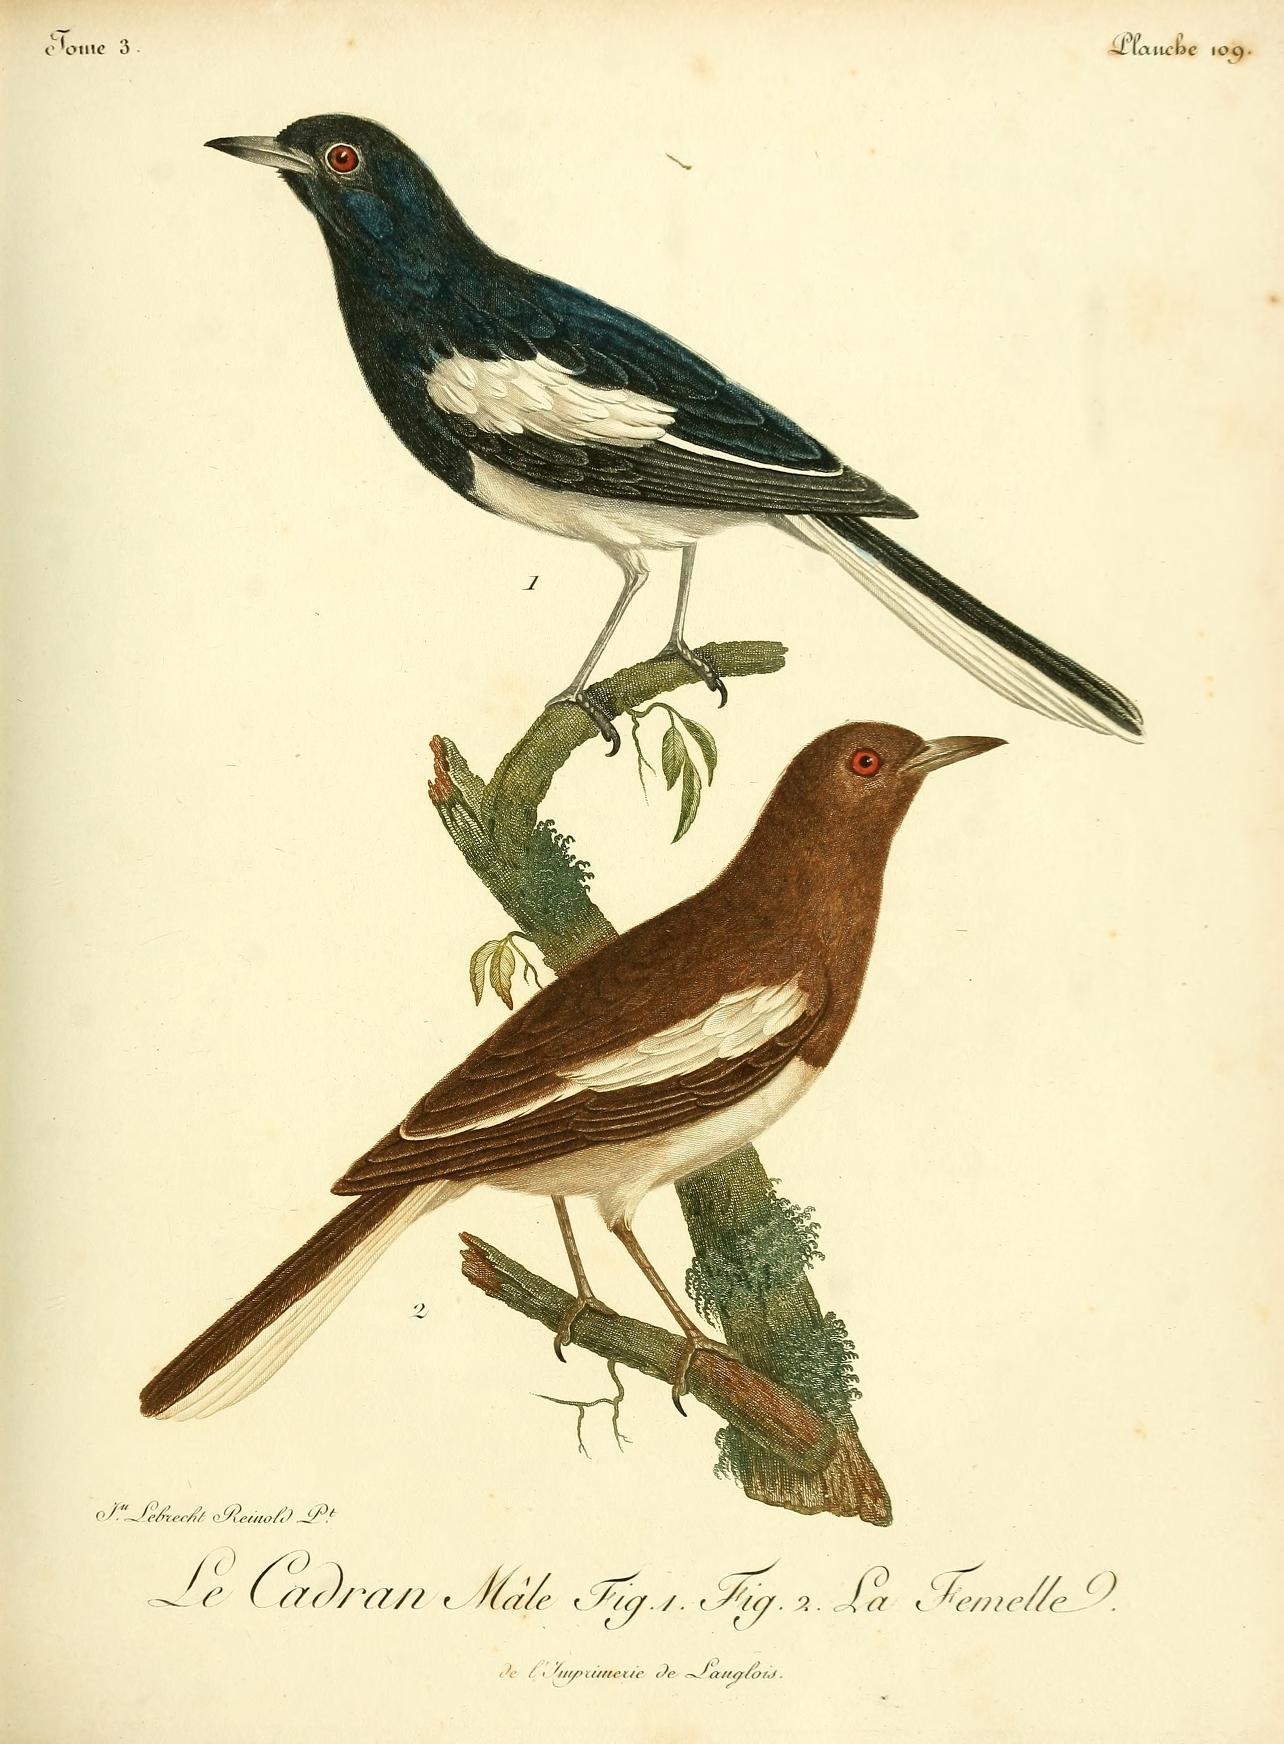 two birds standing on tree nches, one brown and one white